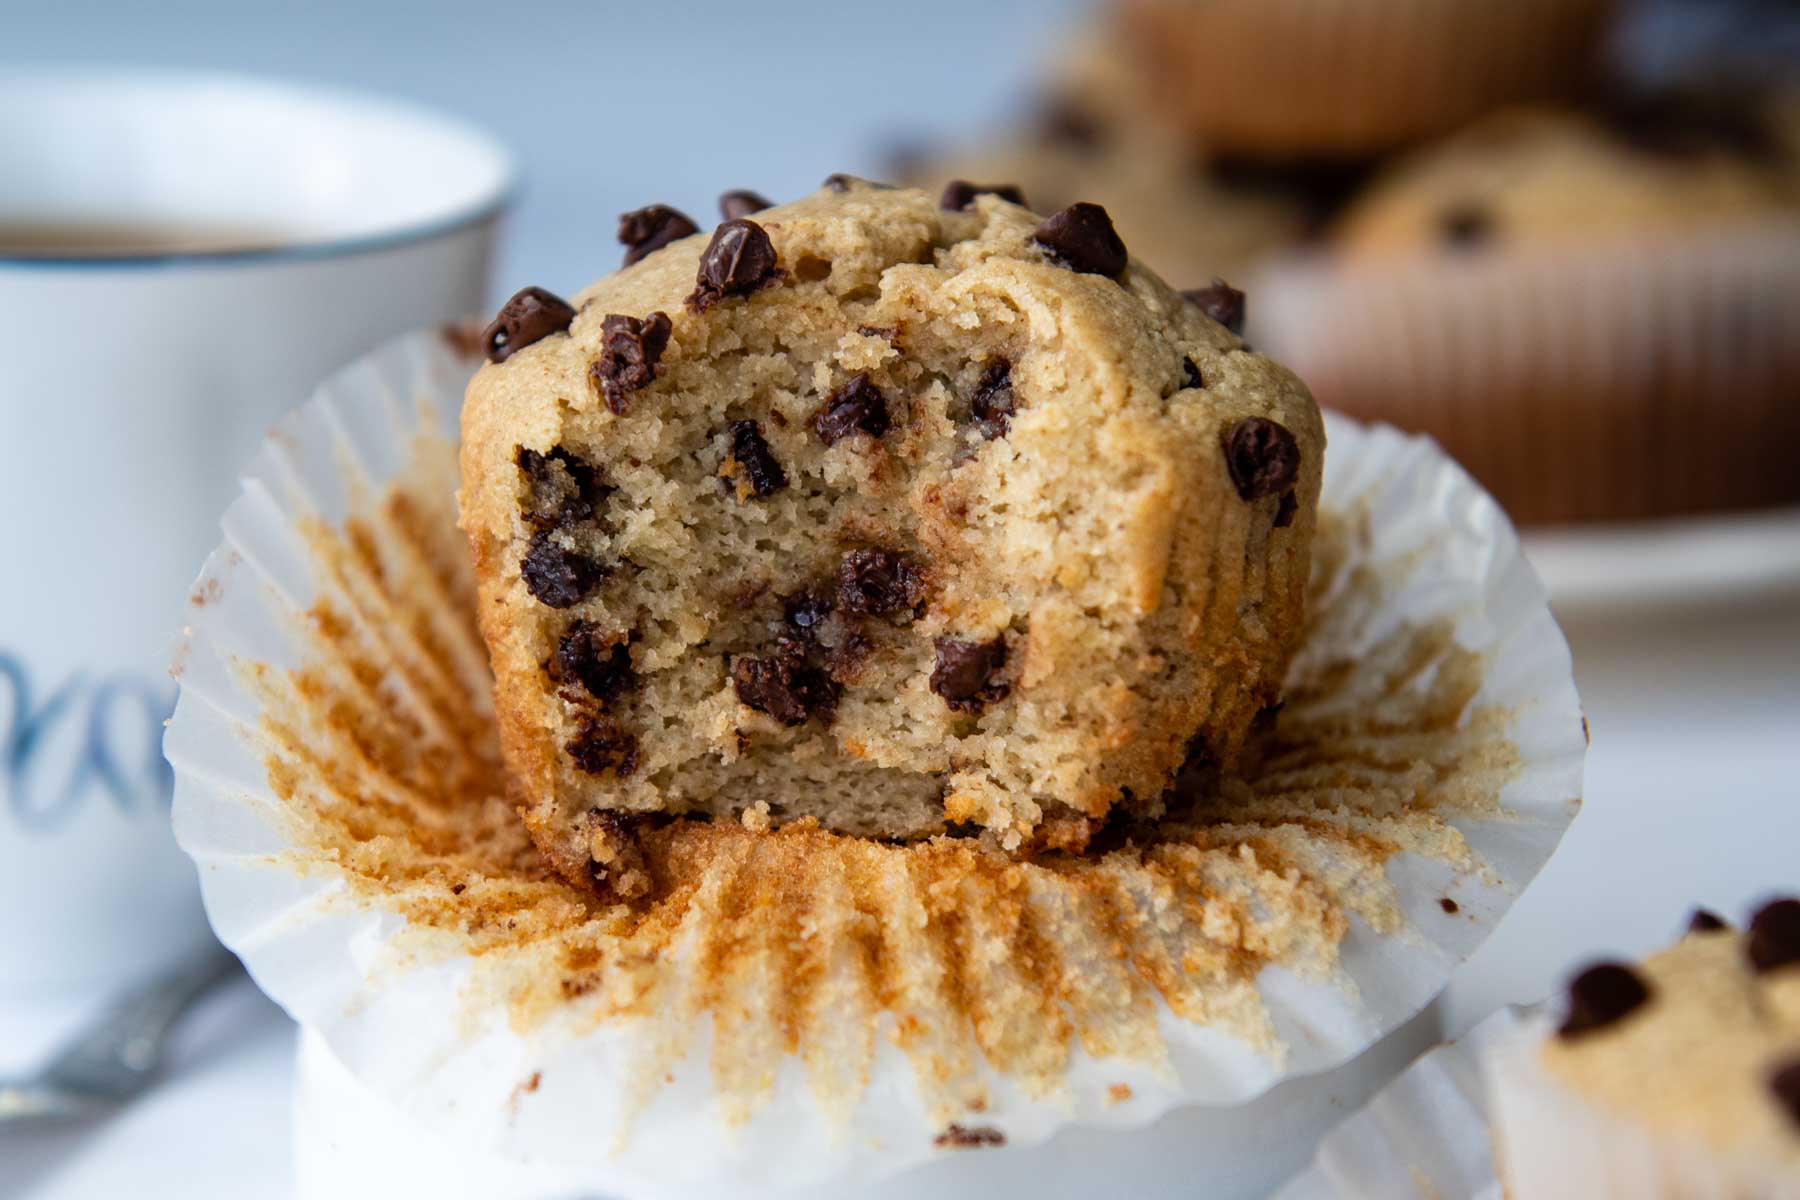 a muffin with a bite taken out facing straight on camera.